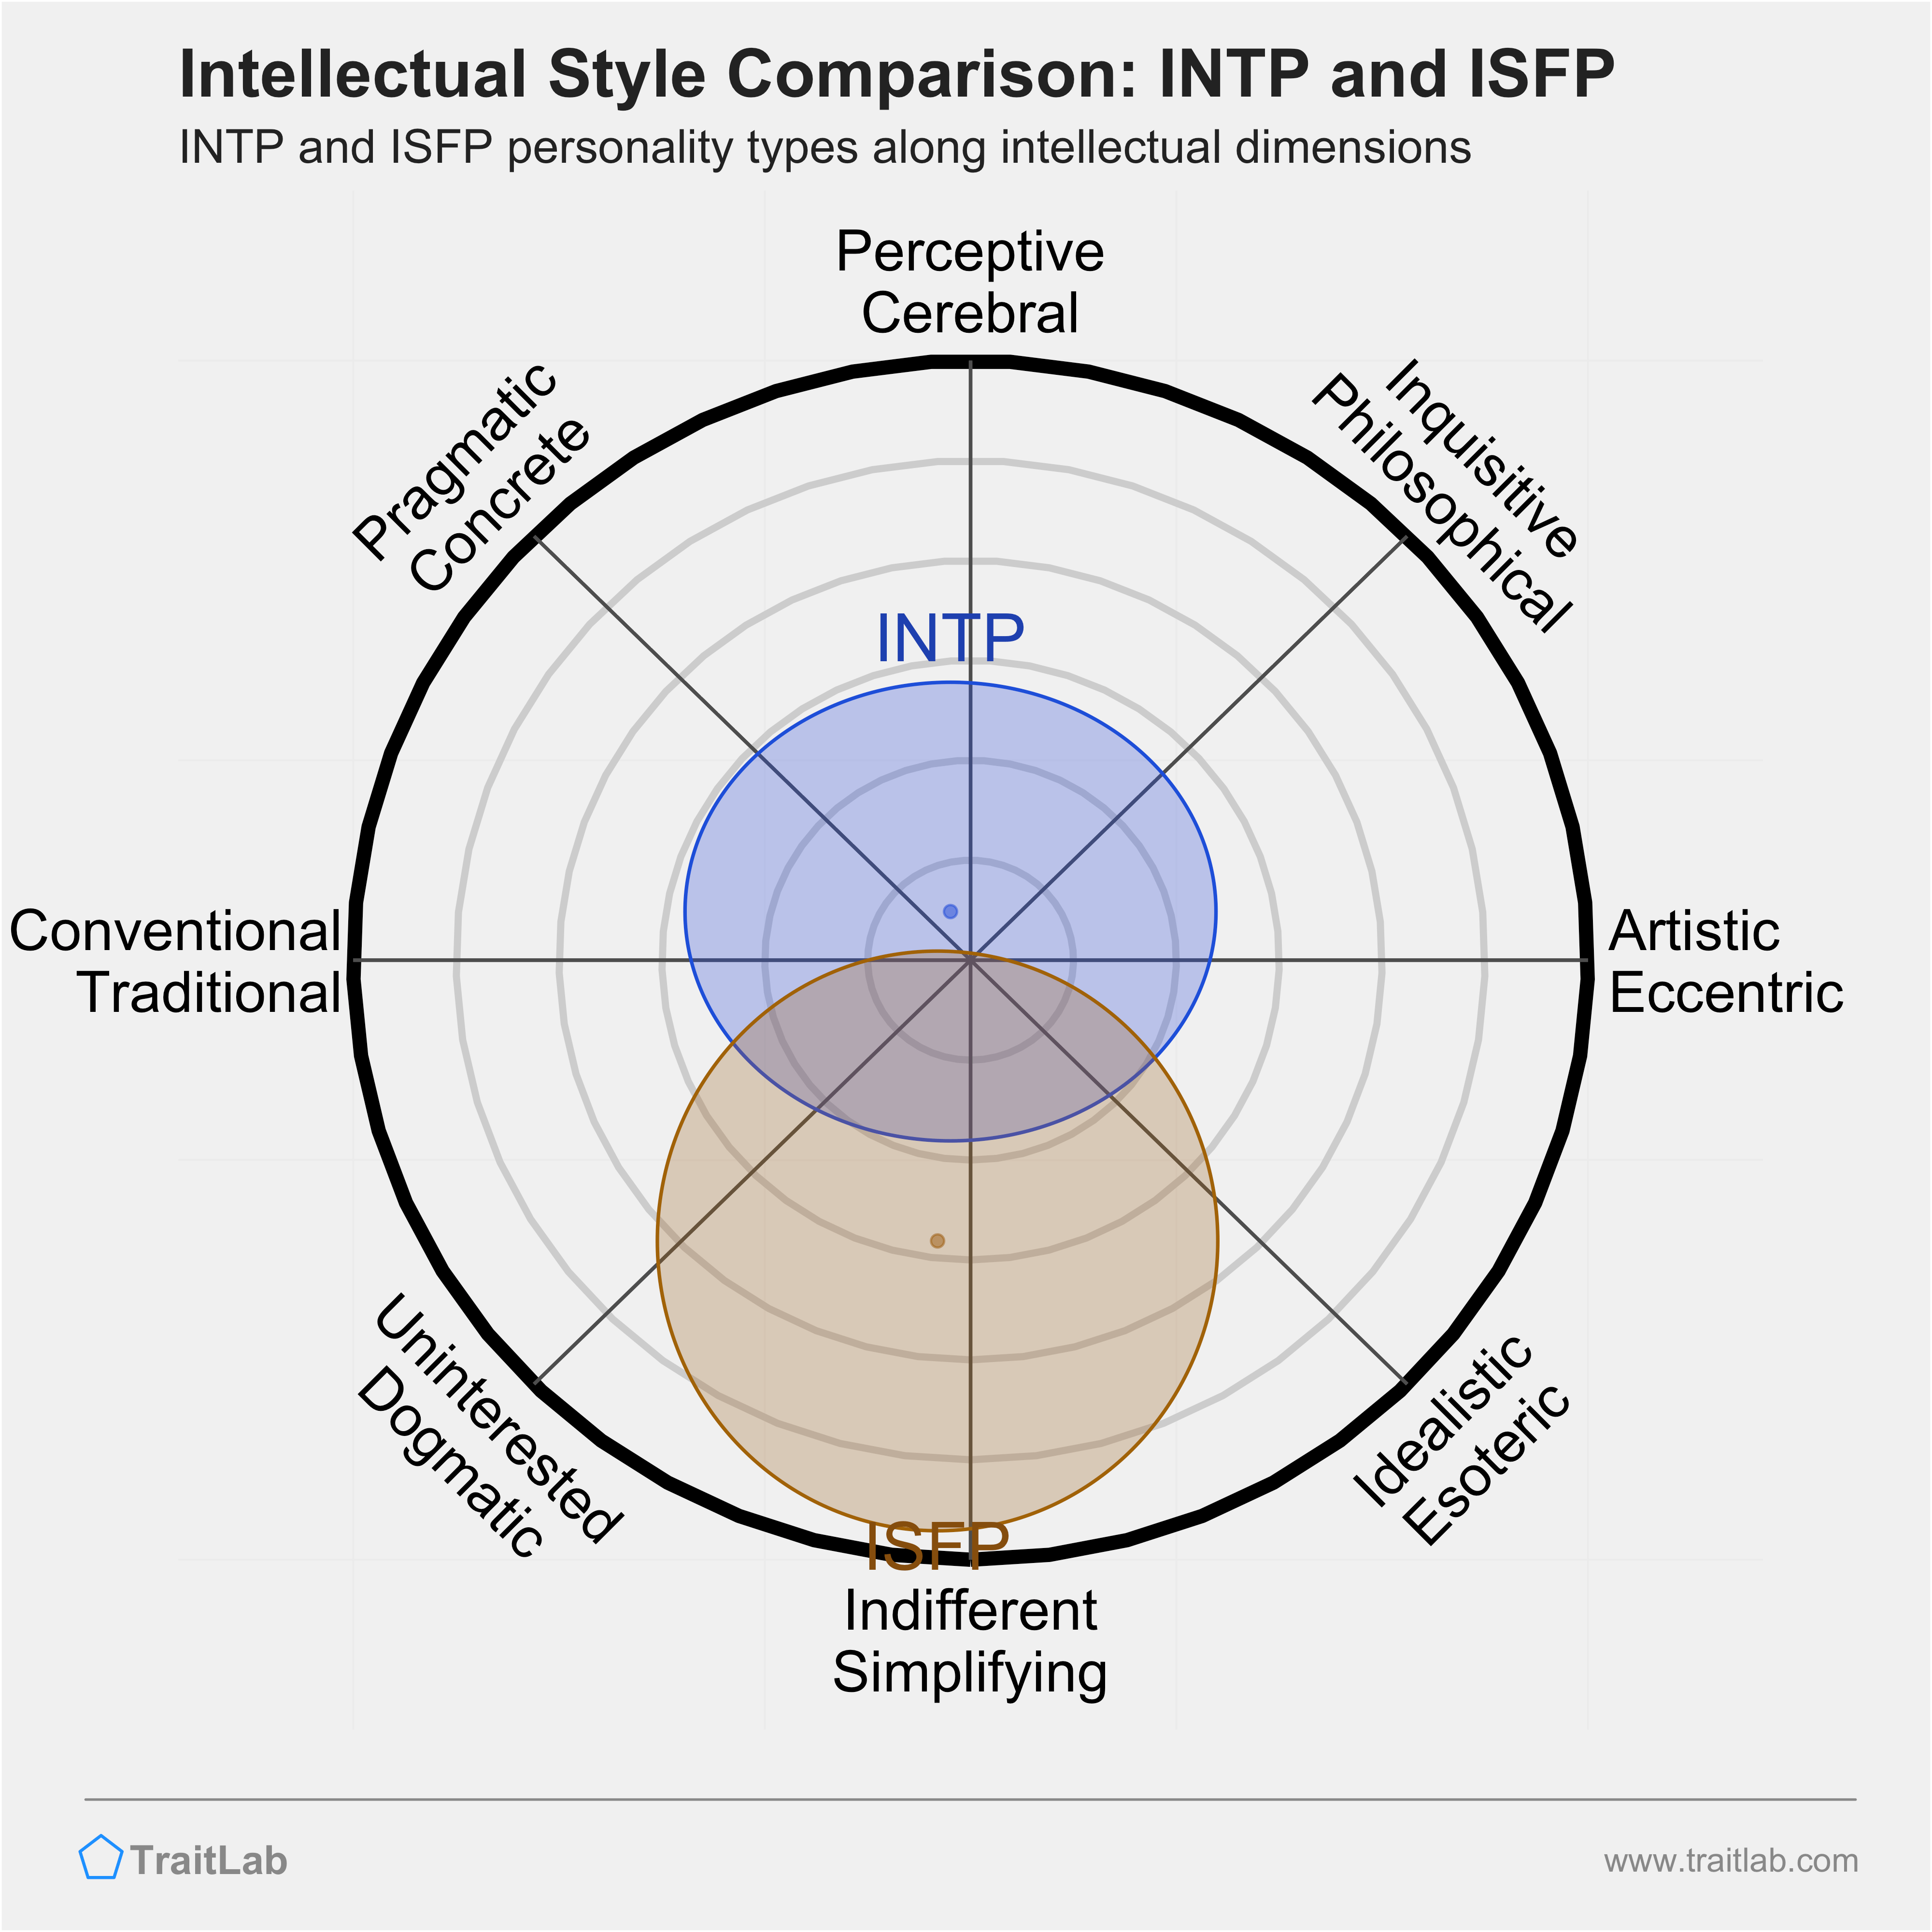 INTP and ISFP comparison across intellectual dimensions